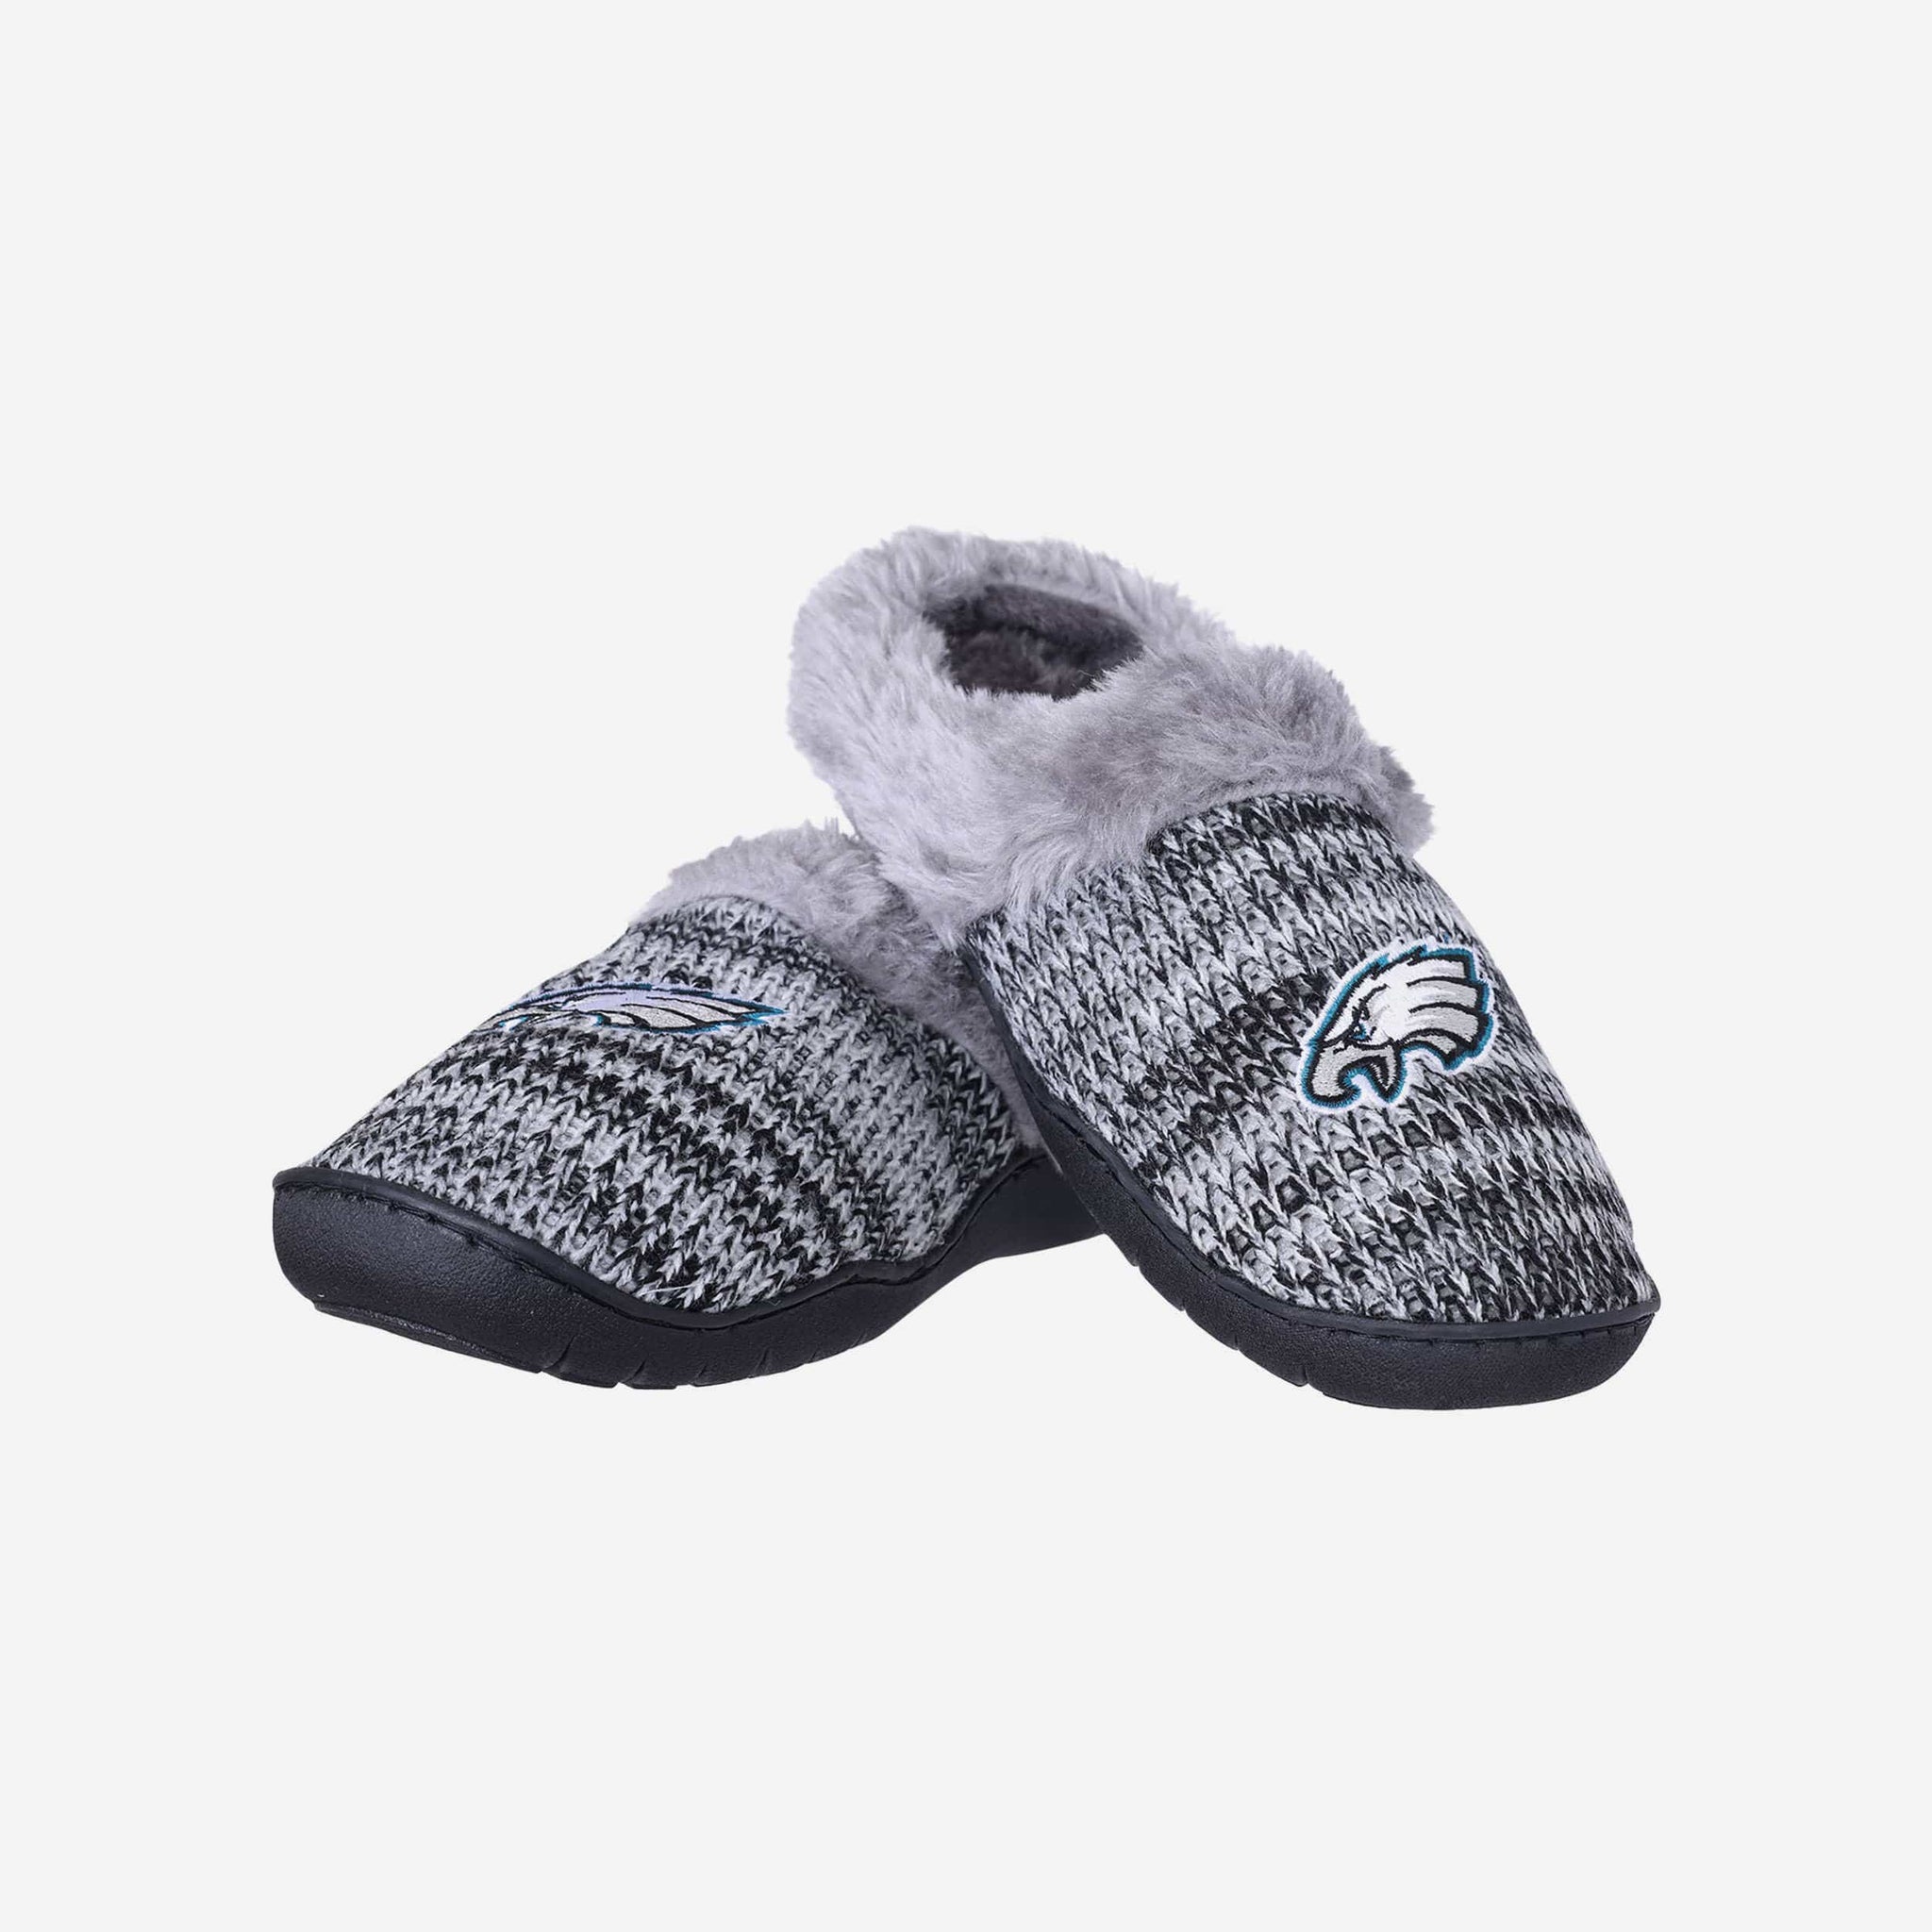 PEAK Sport New Zealand - Peak Slippers ON SALE !! 💸📣📢 Get yourself some  Slippers for $31.60 !! 60% OFF RRP only available THIS WEEK 😍🤩🥳 !! Don't  miss out !! Available